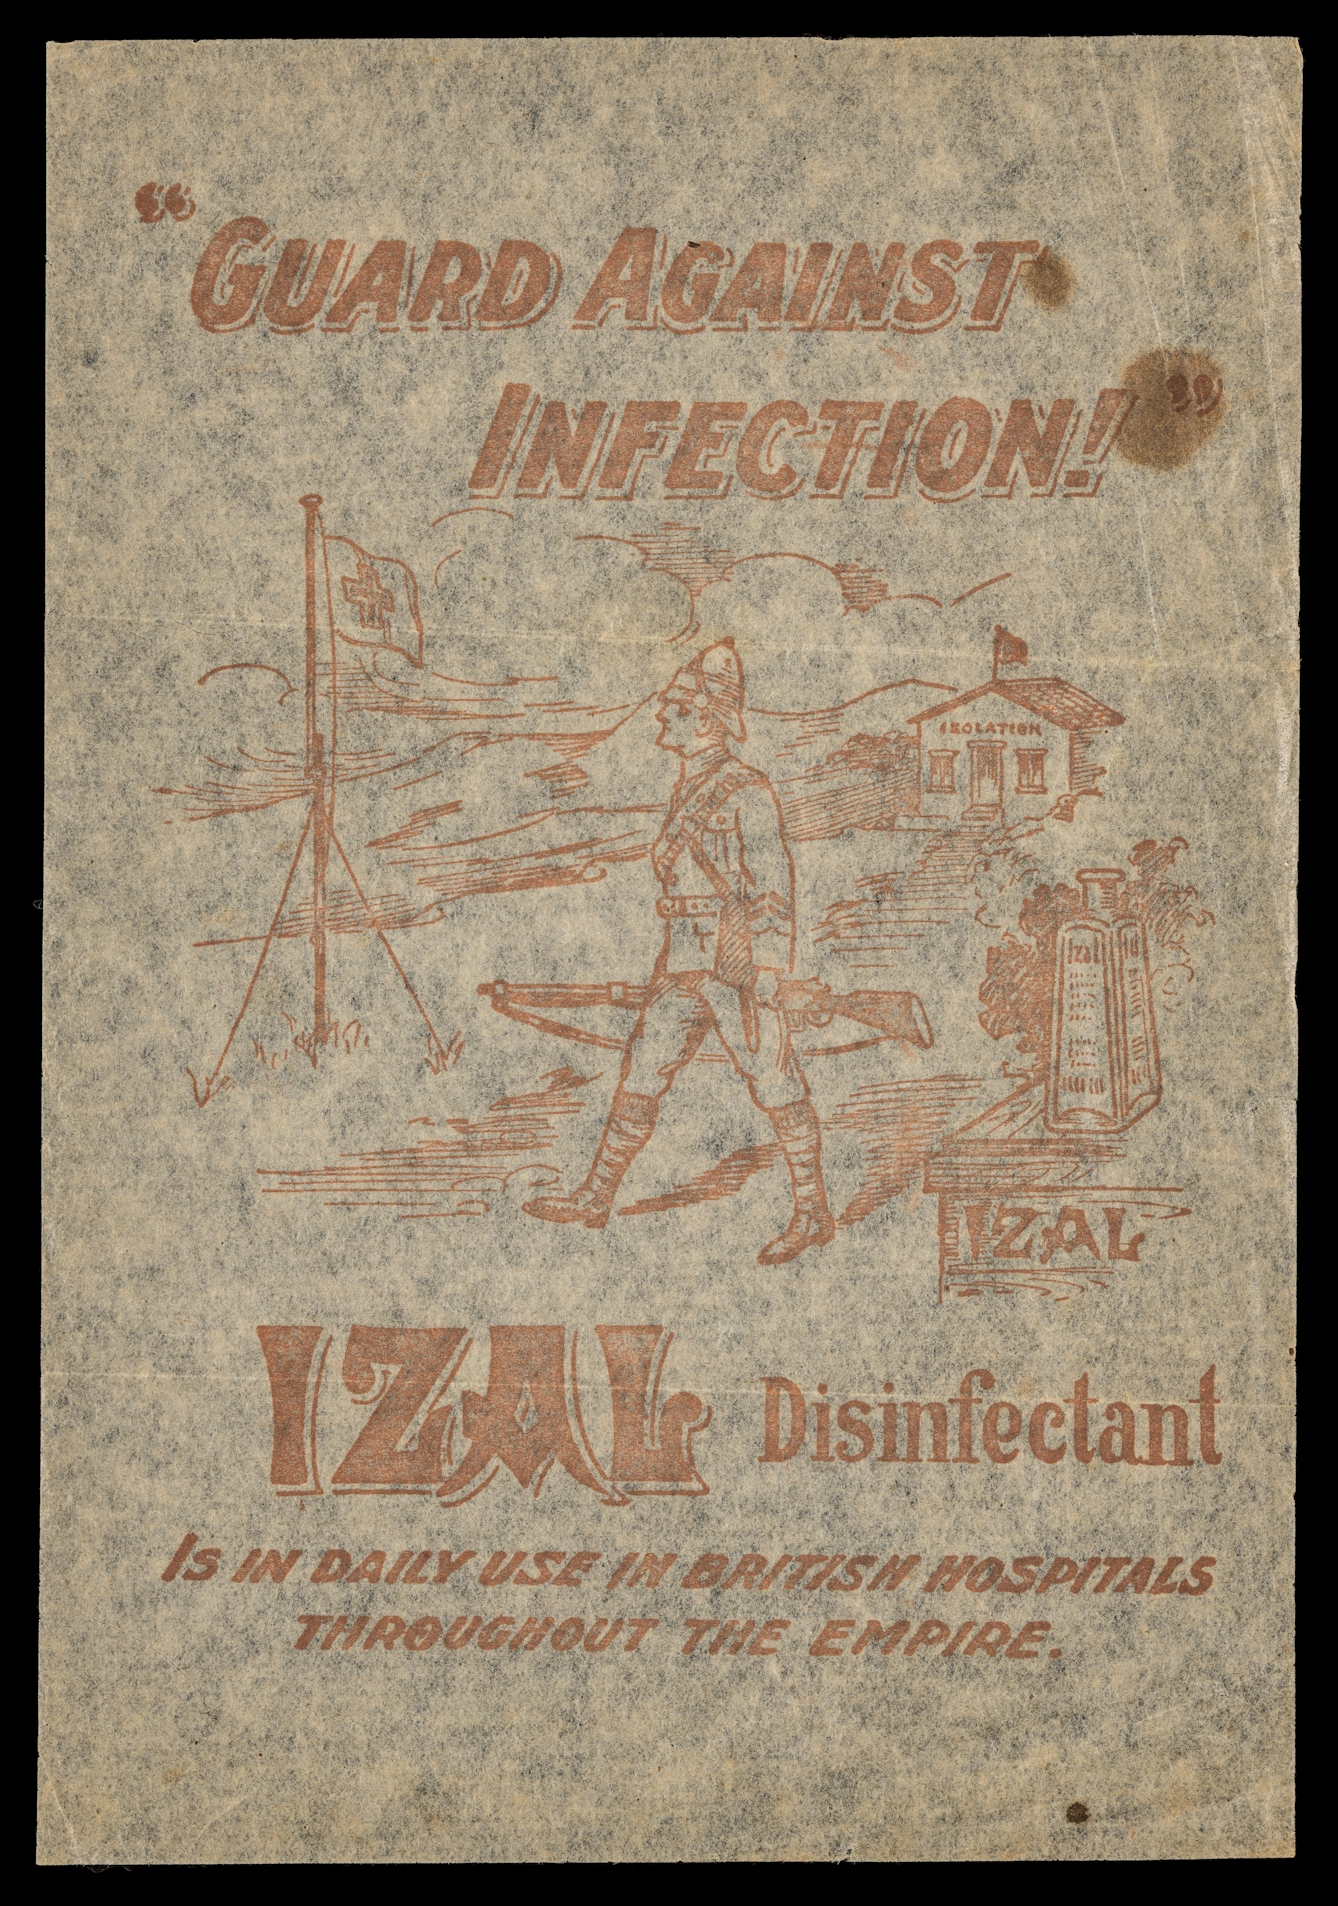 Photograph of a toilet paper sample sheet, bearing the title"Guard Against Infection" and an illustration of a British soldier.